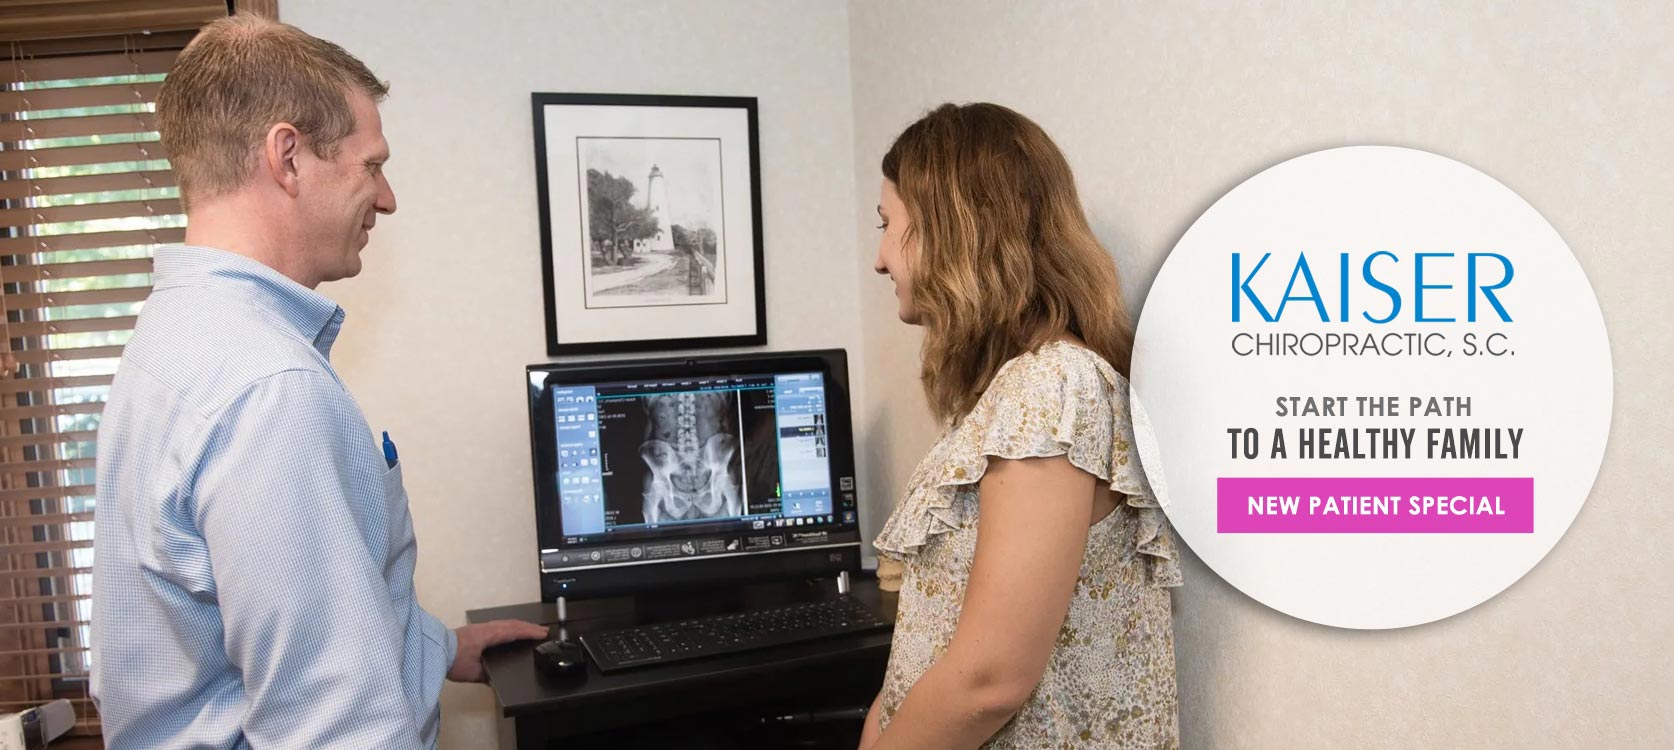 Chiropractor Lake Geneva WI Christopher Kaiser Reviewing XRay with Patient